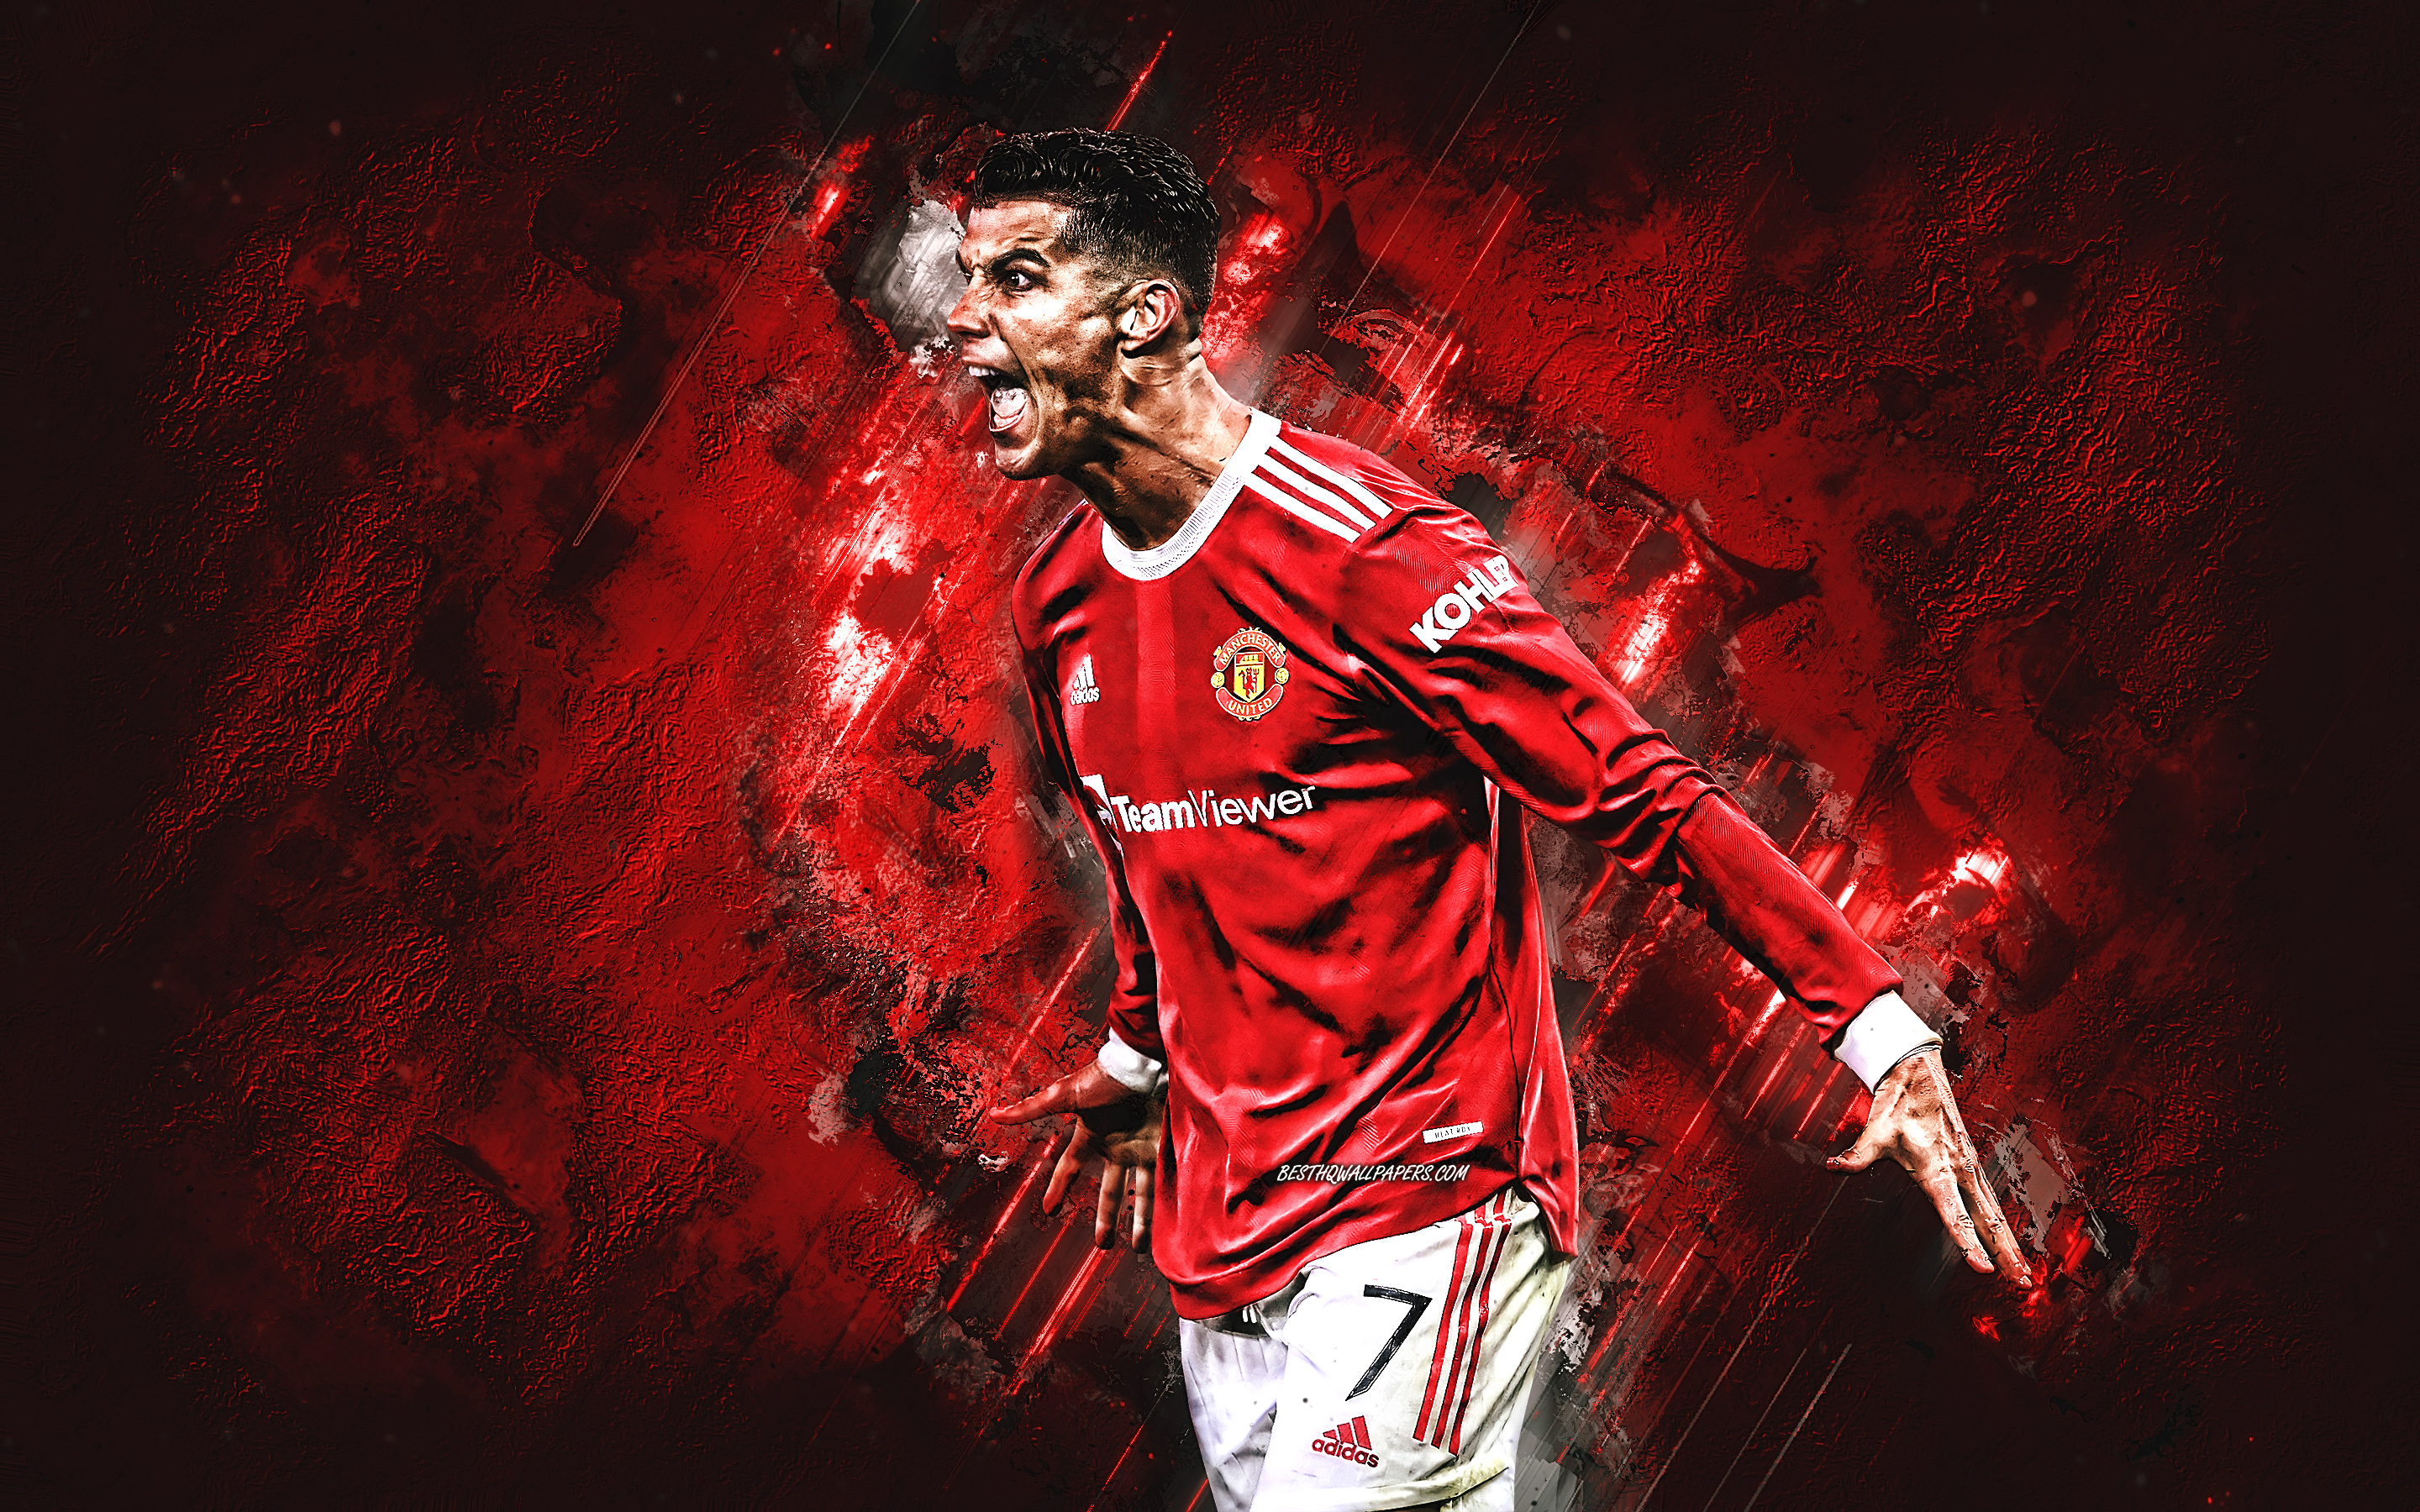 Download wallpaper Cristiano Ronaldo, Manchester United FC, red stone background, Ronaldo Manchester United, CR7 Manchester, football star, football for desktop with resolution 2880x1800. High Quality HD picture wallpaper